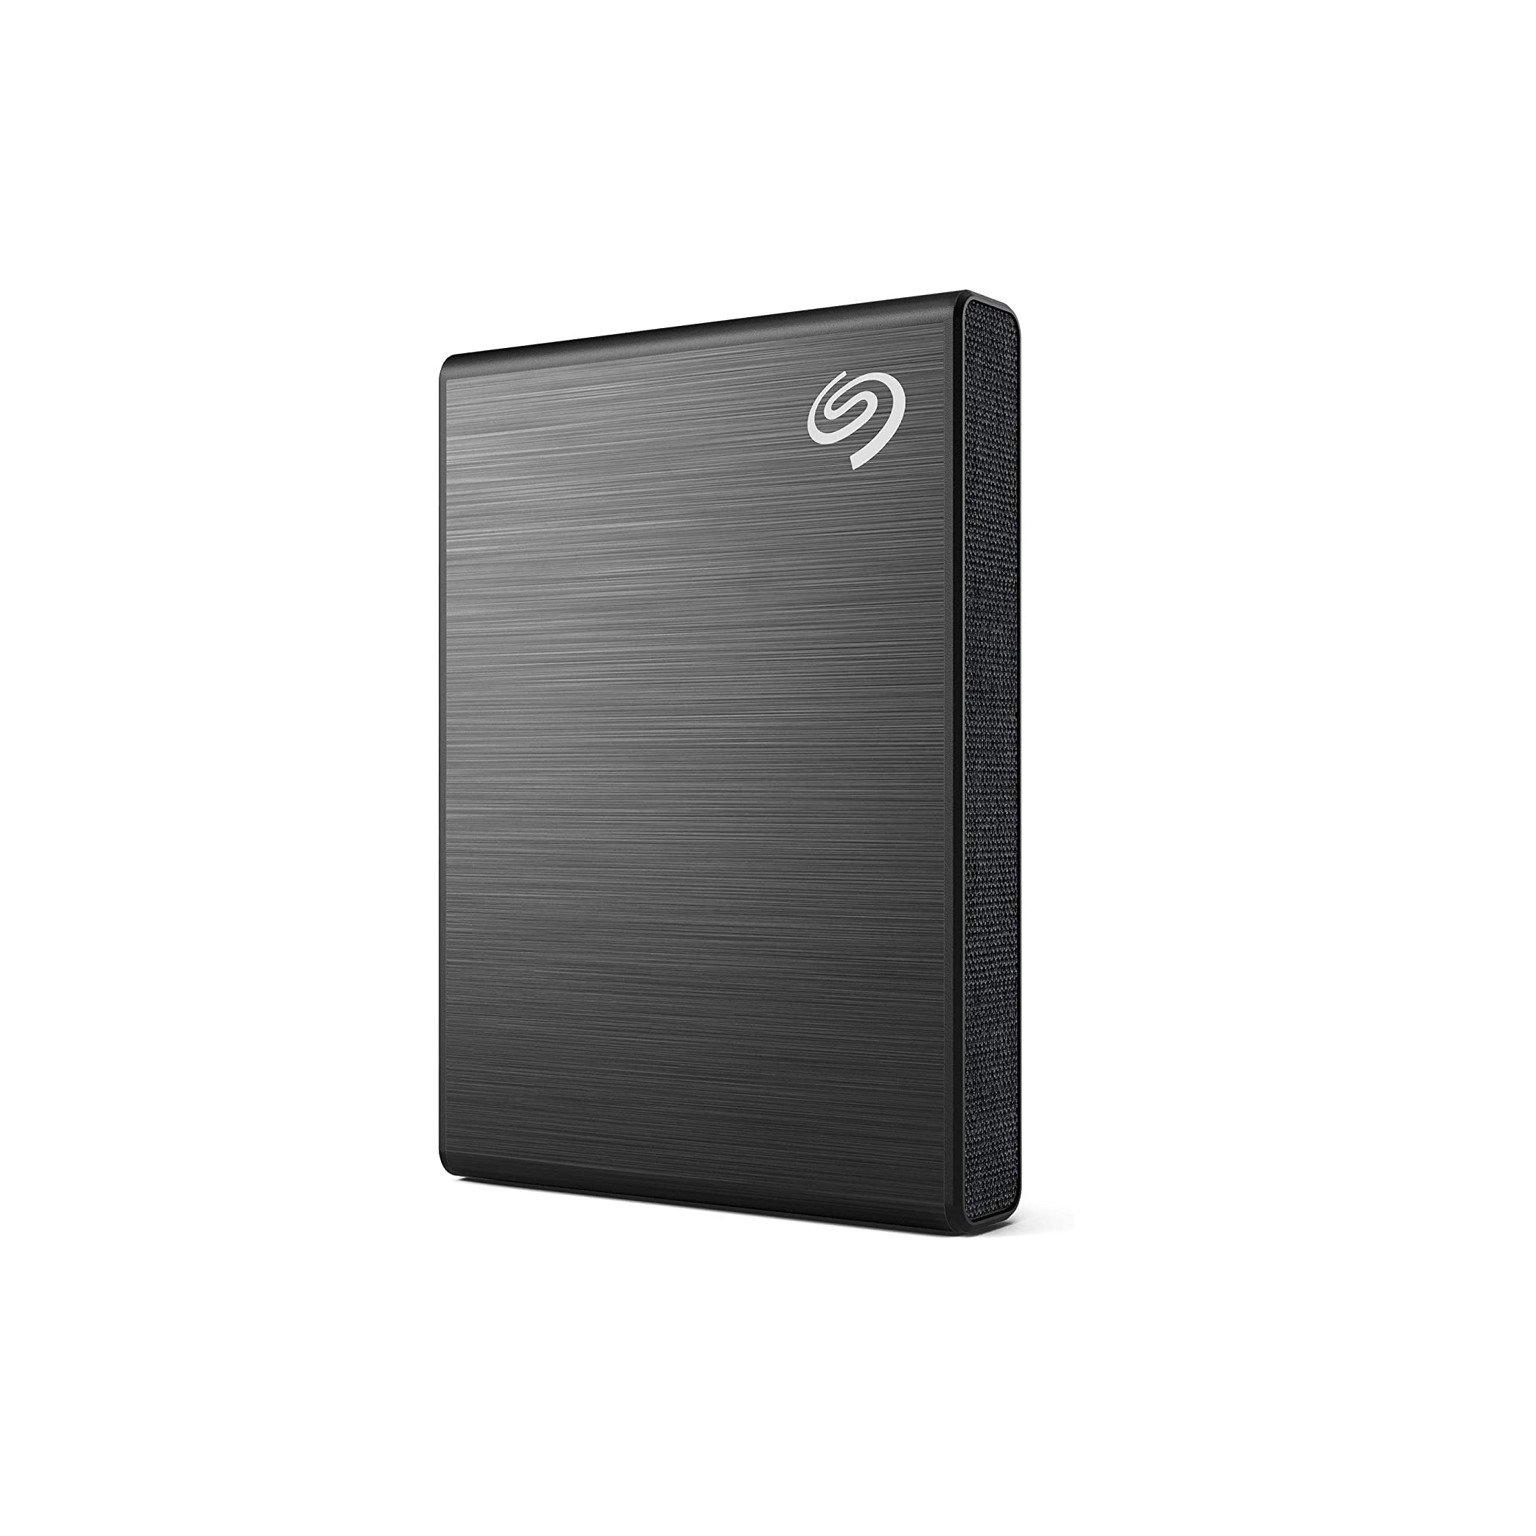 Seagate One Touch SSD 2TB - USB C - Black